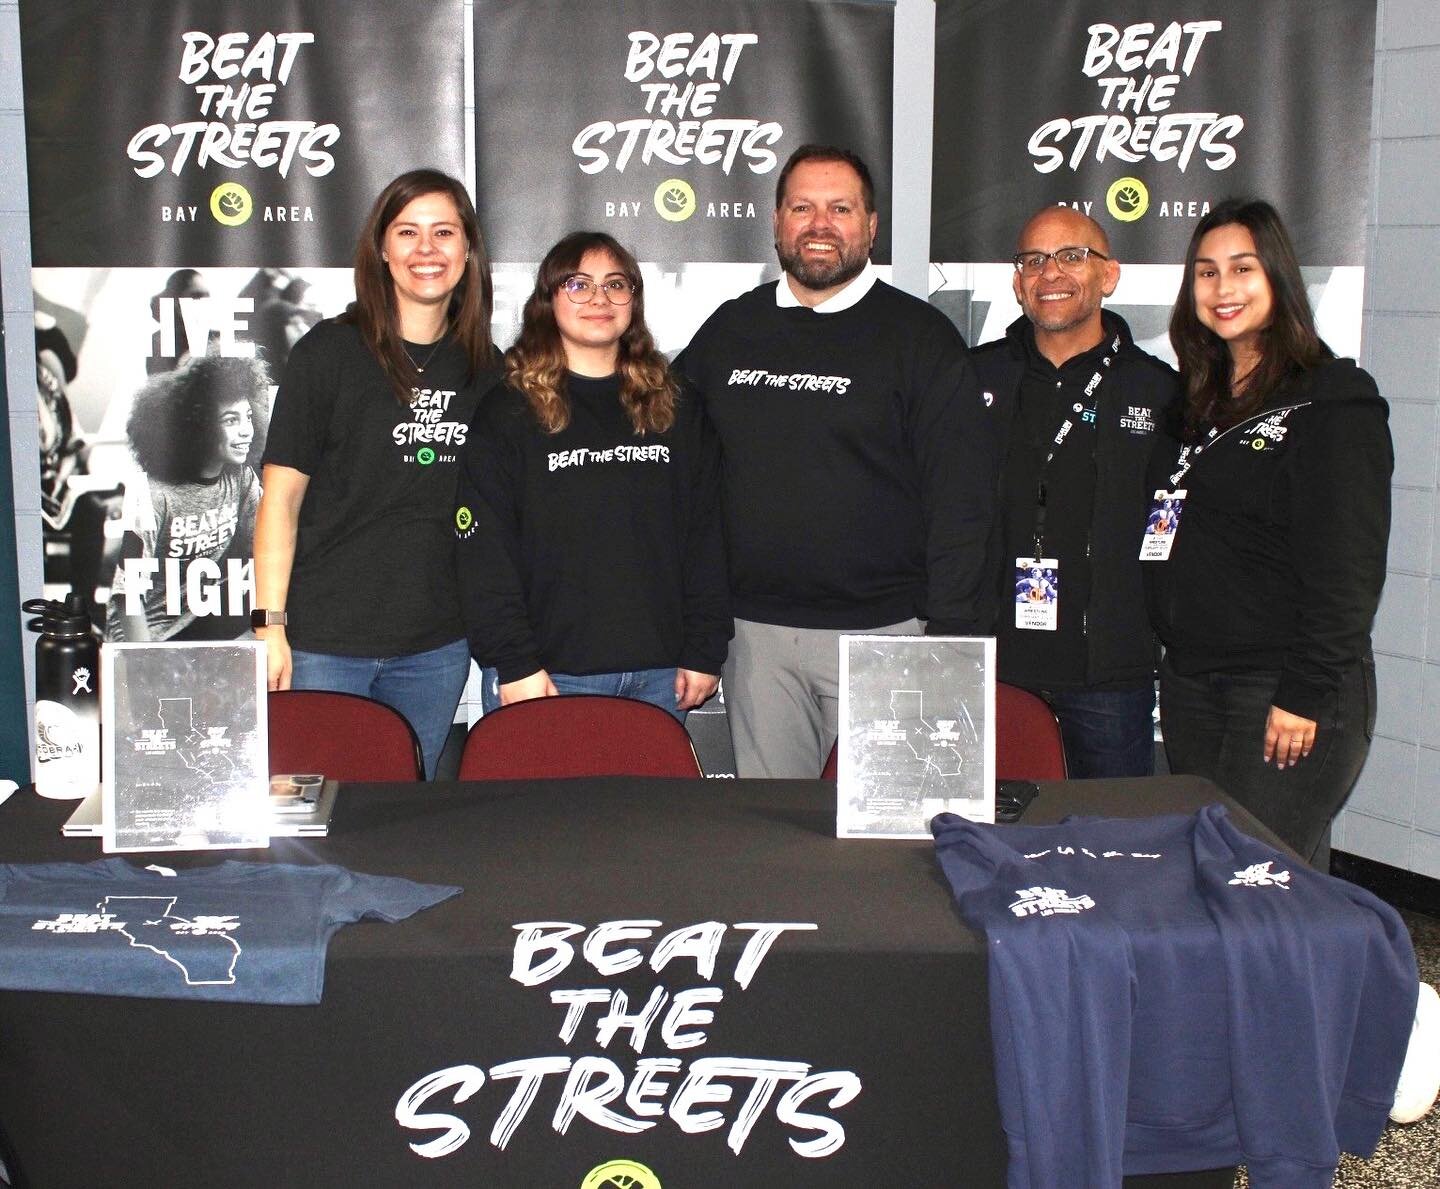 We loved to welcome both new and familiar faces at our booth during the CIF State Championship weekend! And a huge thank you to our new recurring donors for taking the time to learn more about our mission. Curious about how you can support BTSBA? Ask